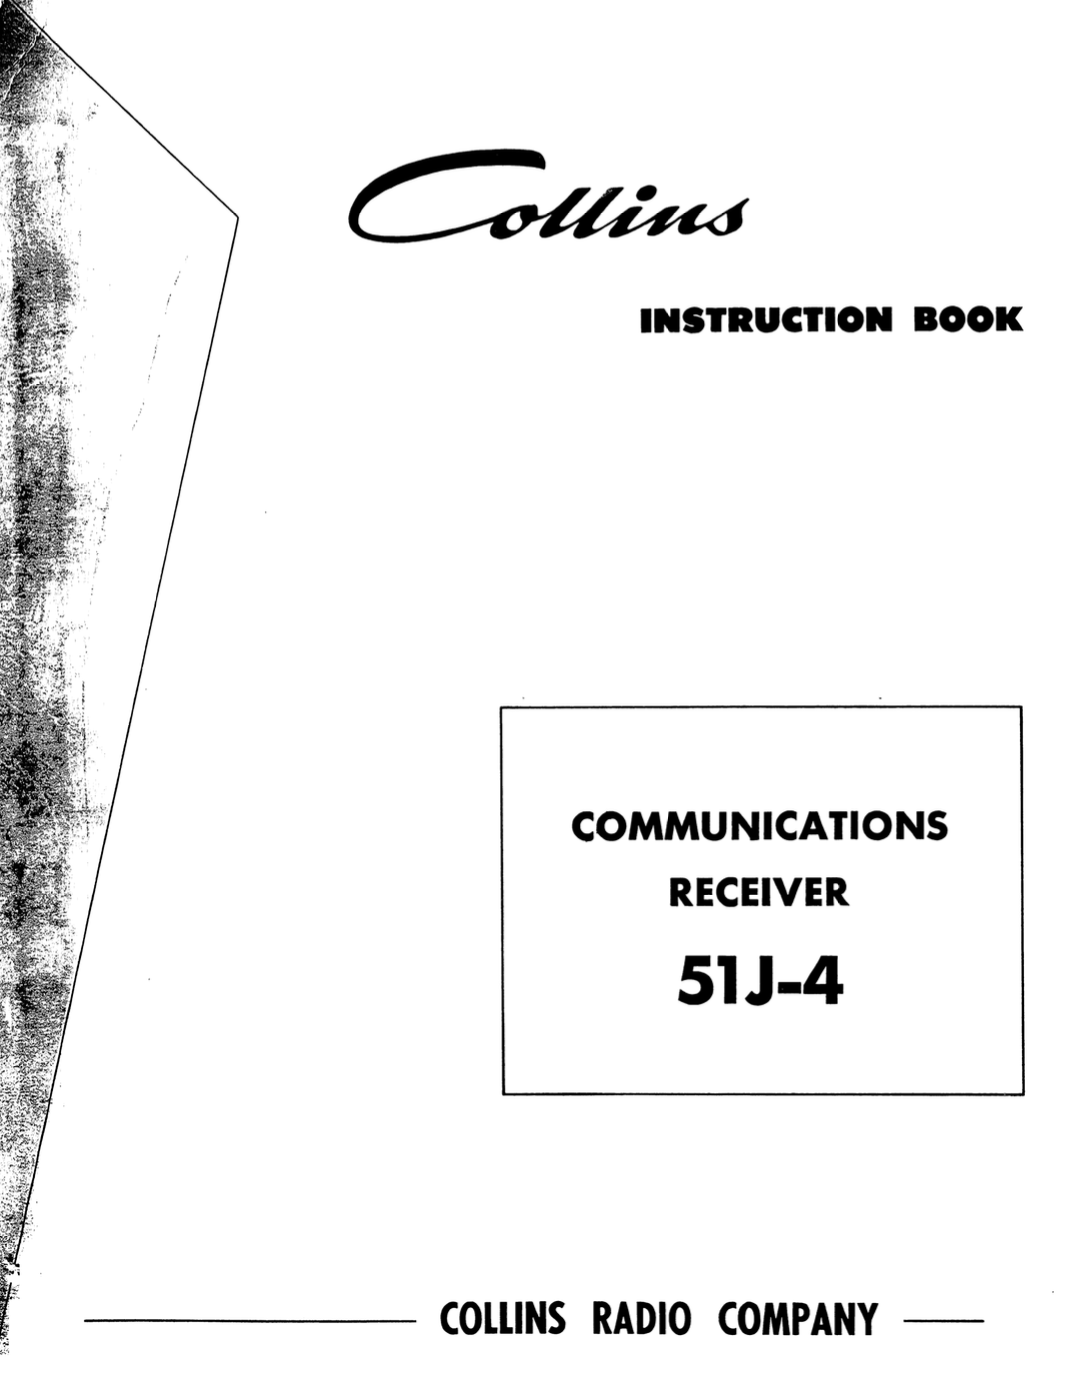 Collins 51J-4 Communications Receiver - Instruction Manual (4th Edition) 2